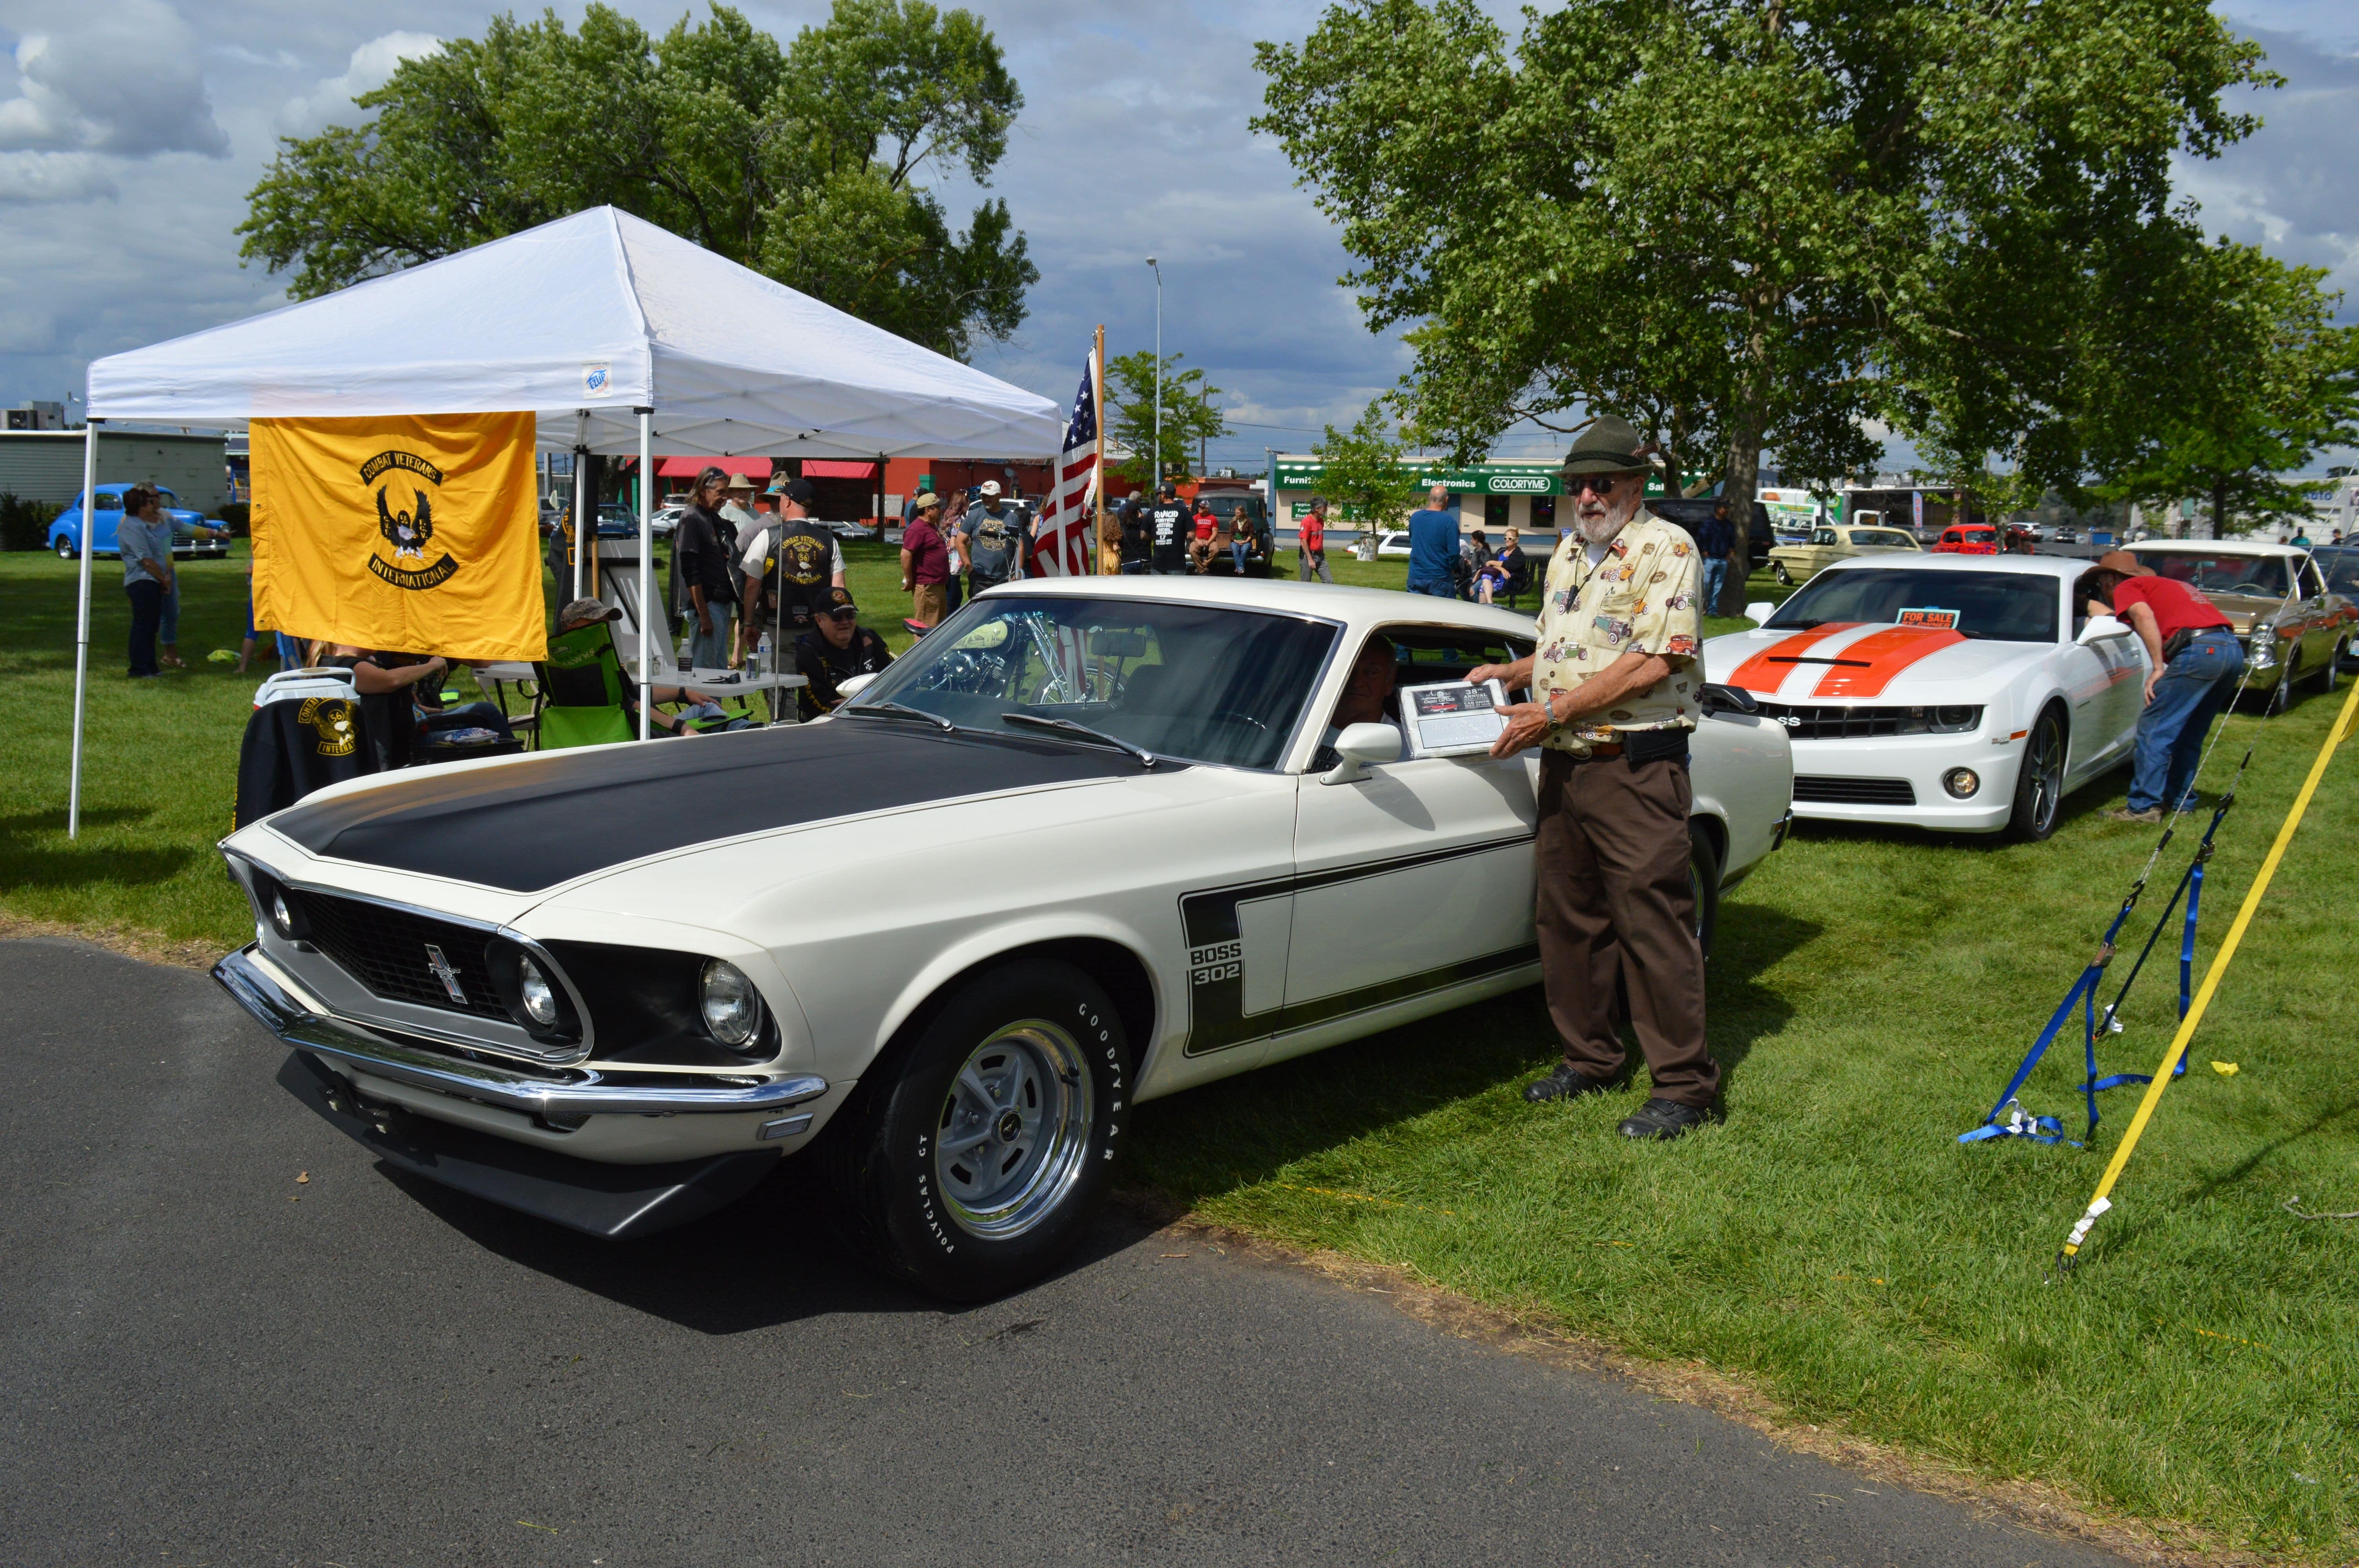 1969 Ford Mustrang Boss 302 - Fire Chief Choice - Dick Knight